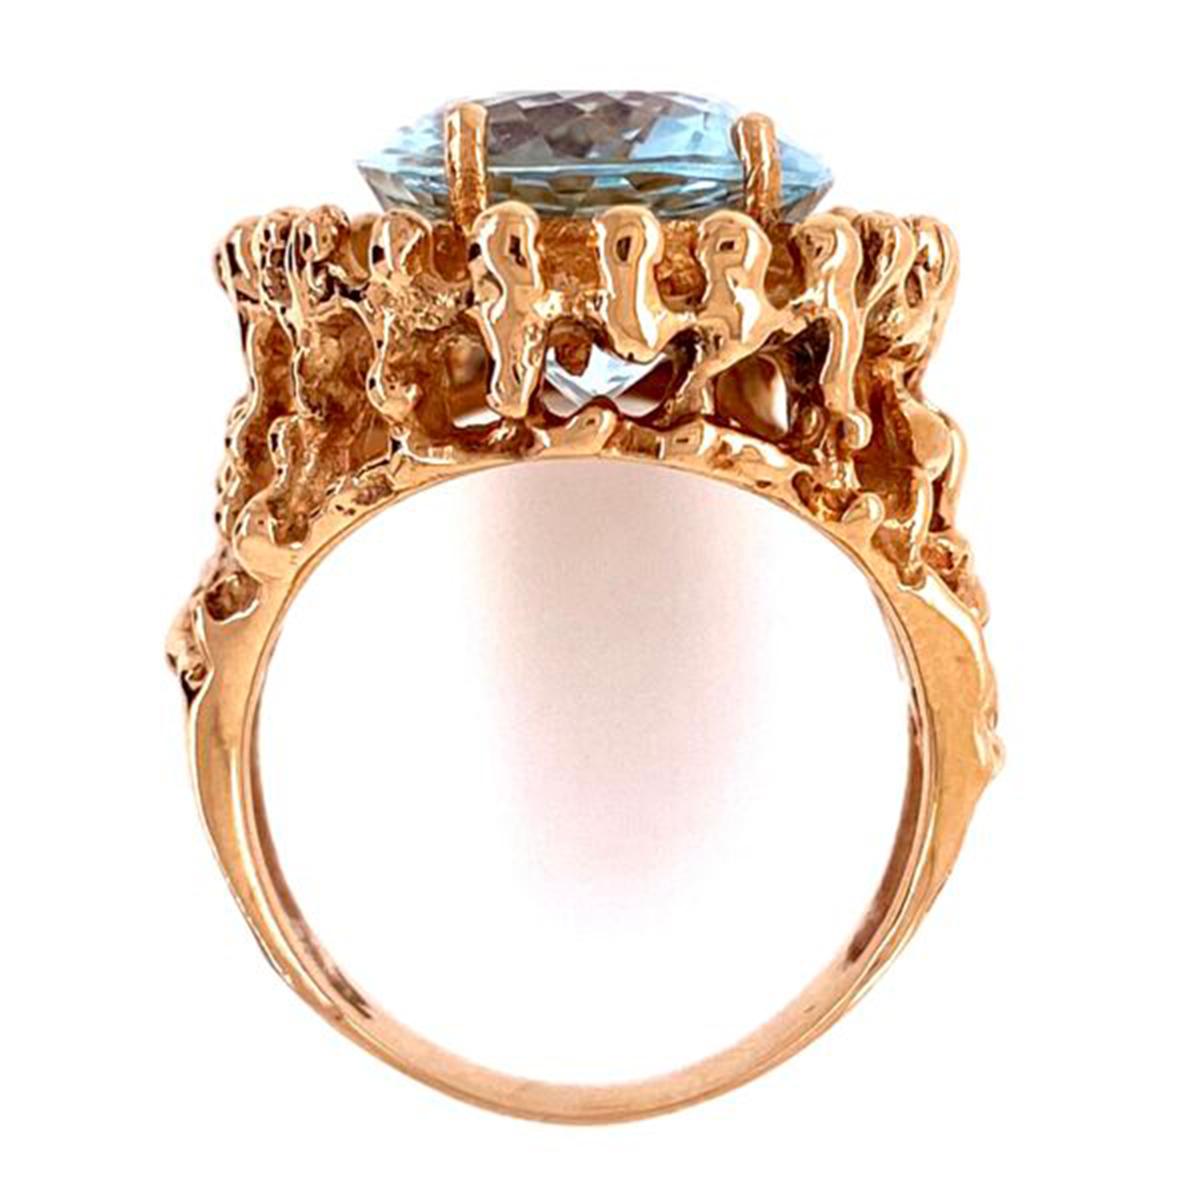 Simply Beautiful, Elegant and finely detailed Mid Century Modern Cocktail Ring; center set with an oval Aquamarine Sapphire, weighing approx. 8.92 Carats. Hand crafted and Hand Textured surround in 14 Karat Yellow Gold. The ring epitomizes vintage